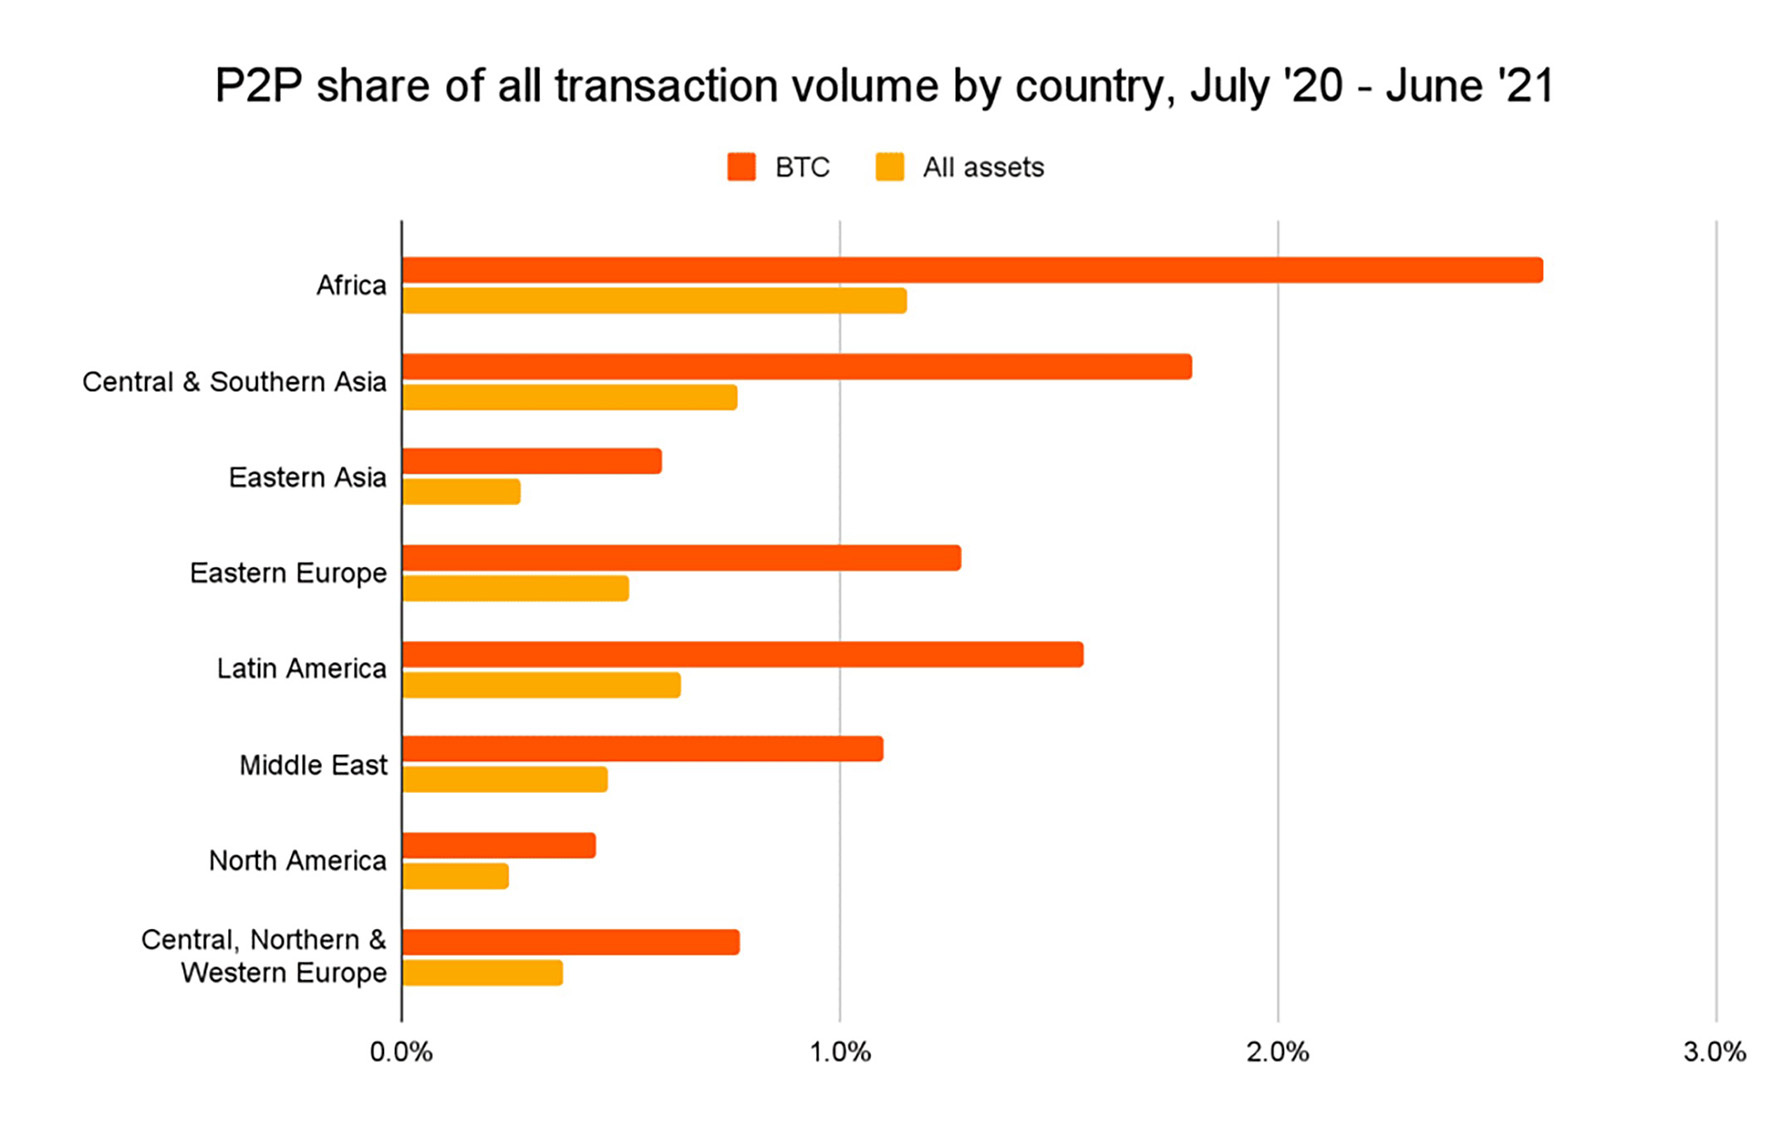 Barchart of P2P share of all transaction volume by country, July ’20 – June ’21